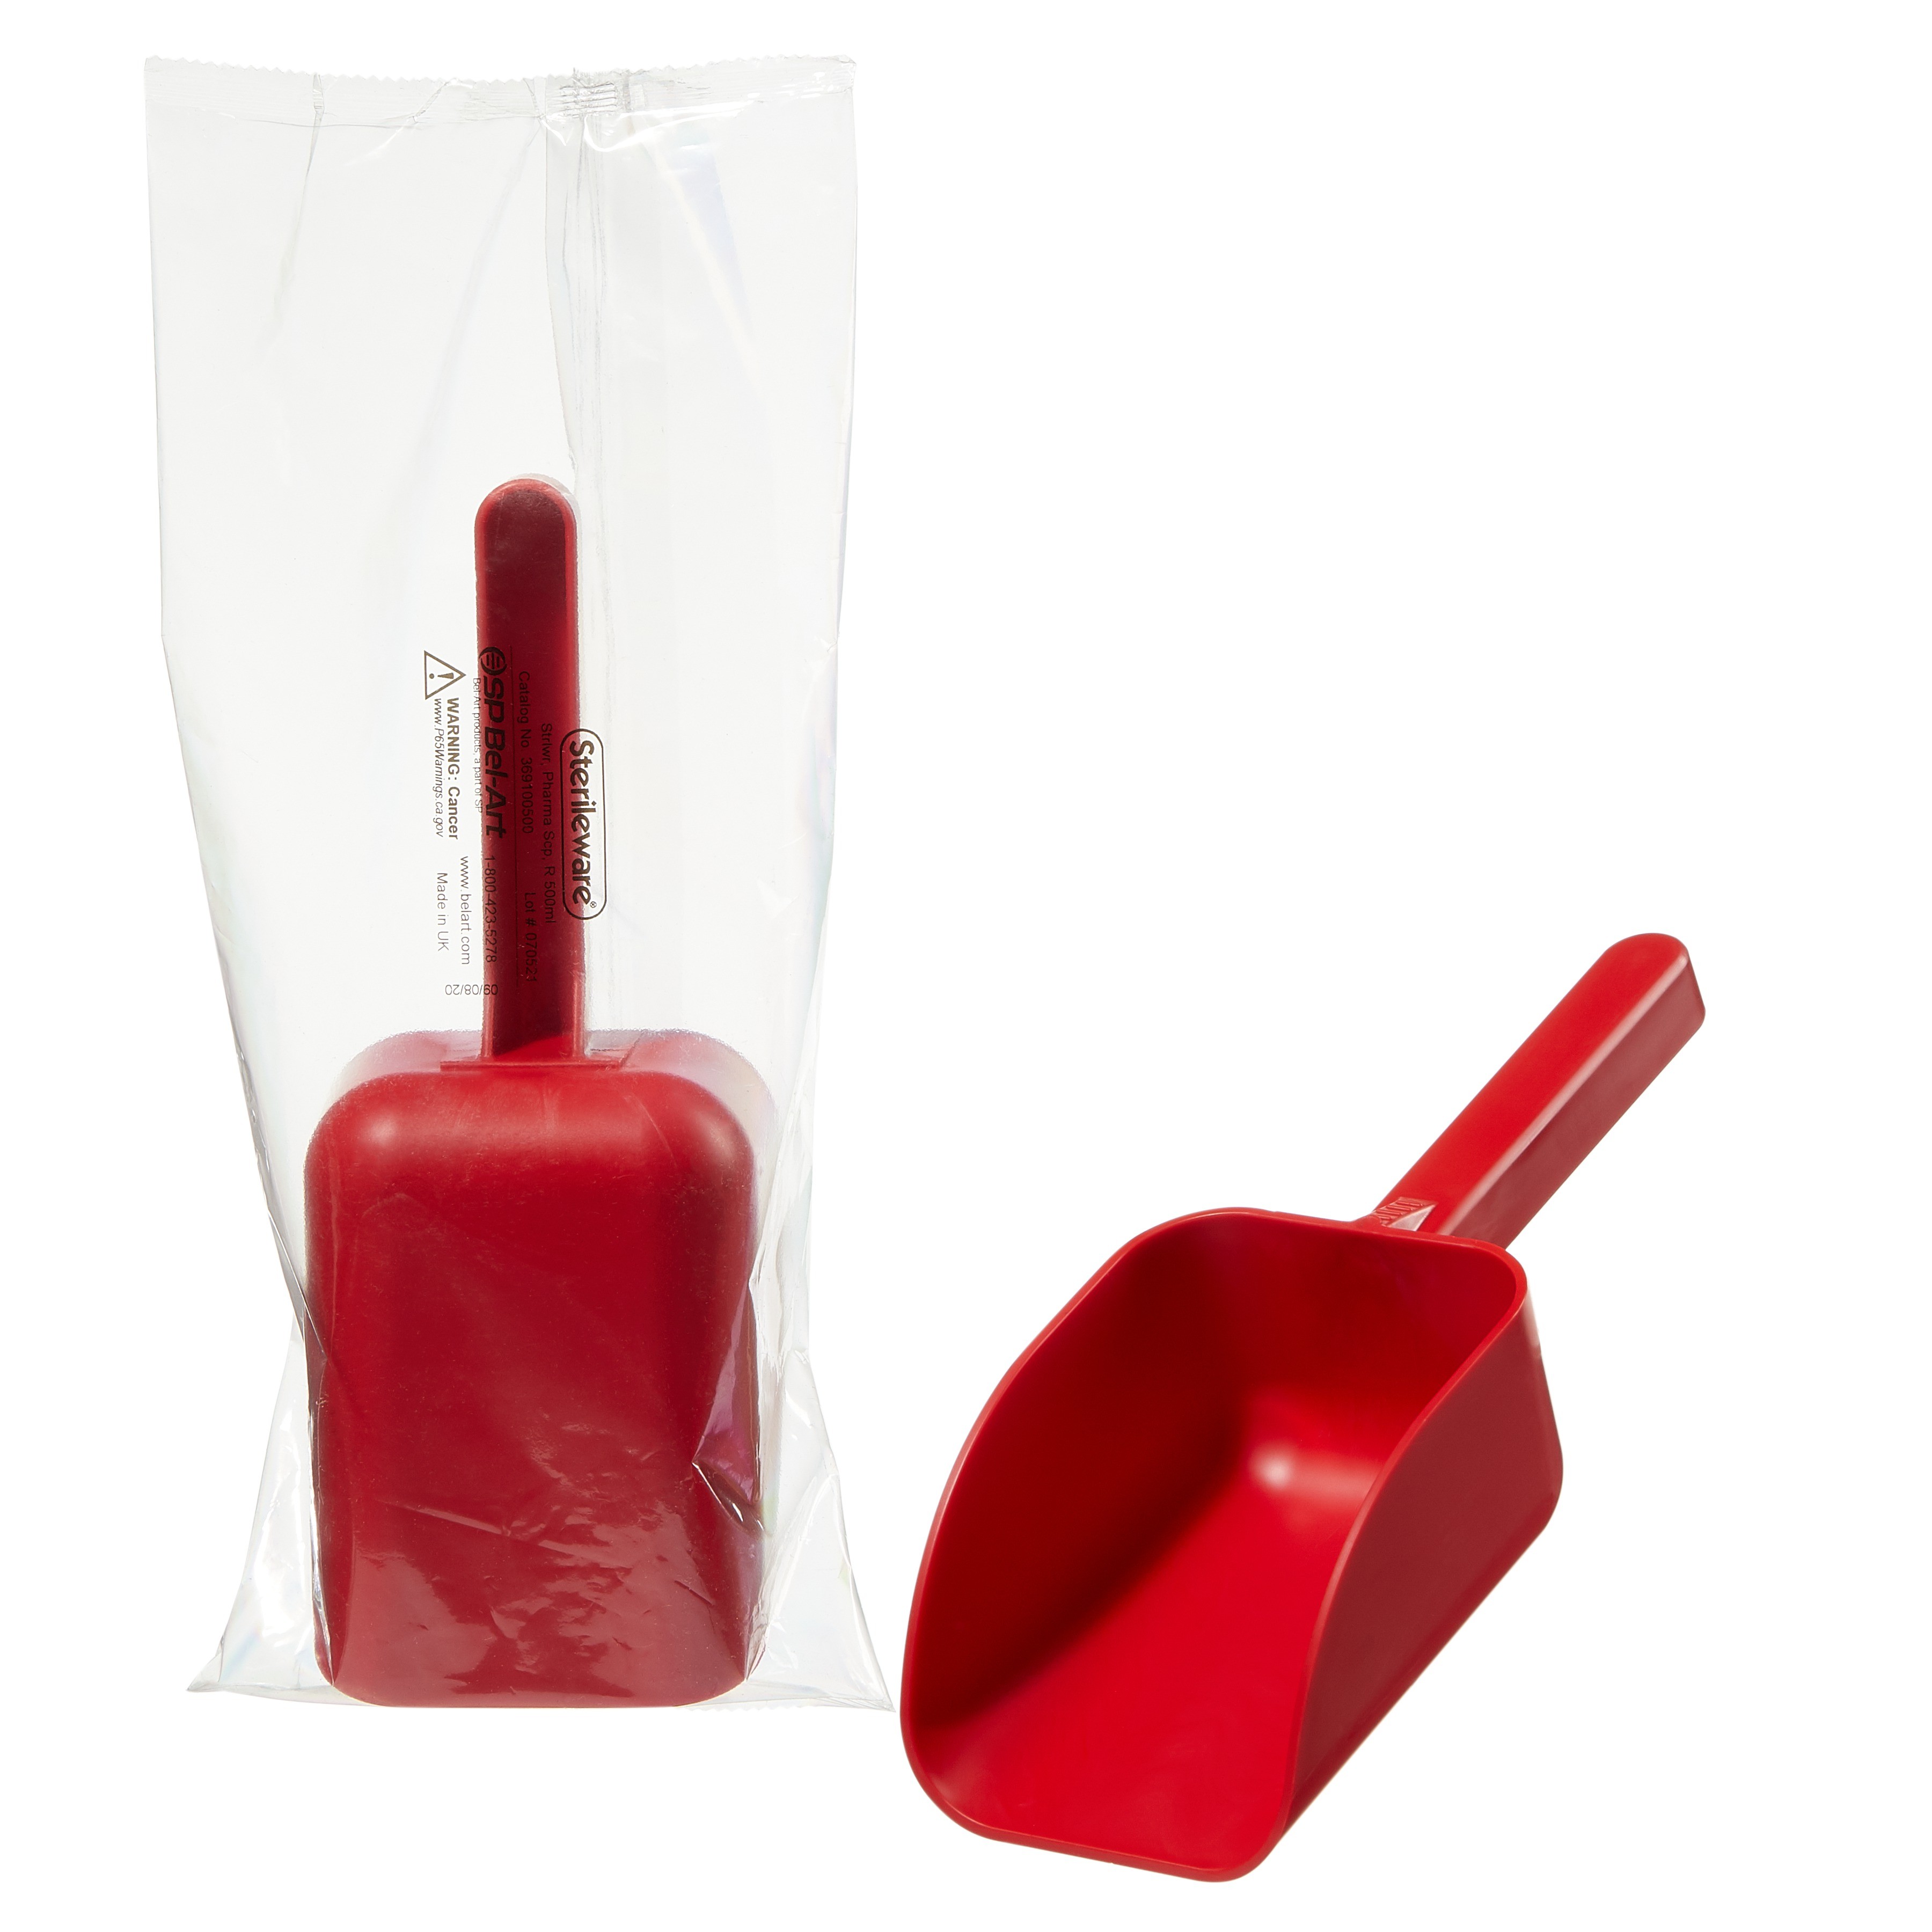 Sterileware Pharma Scoops - Red; 500ml (17oz), Individually Wrapped (Pack of 50)